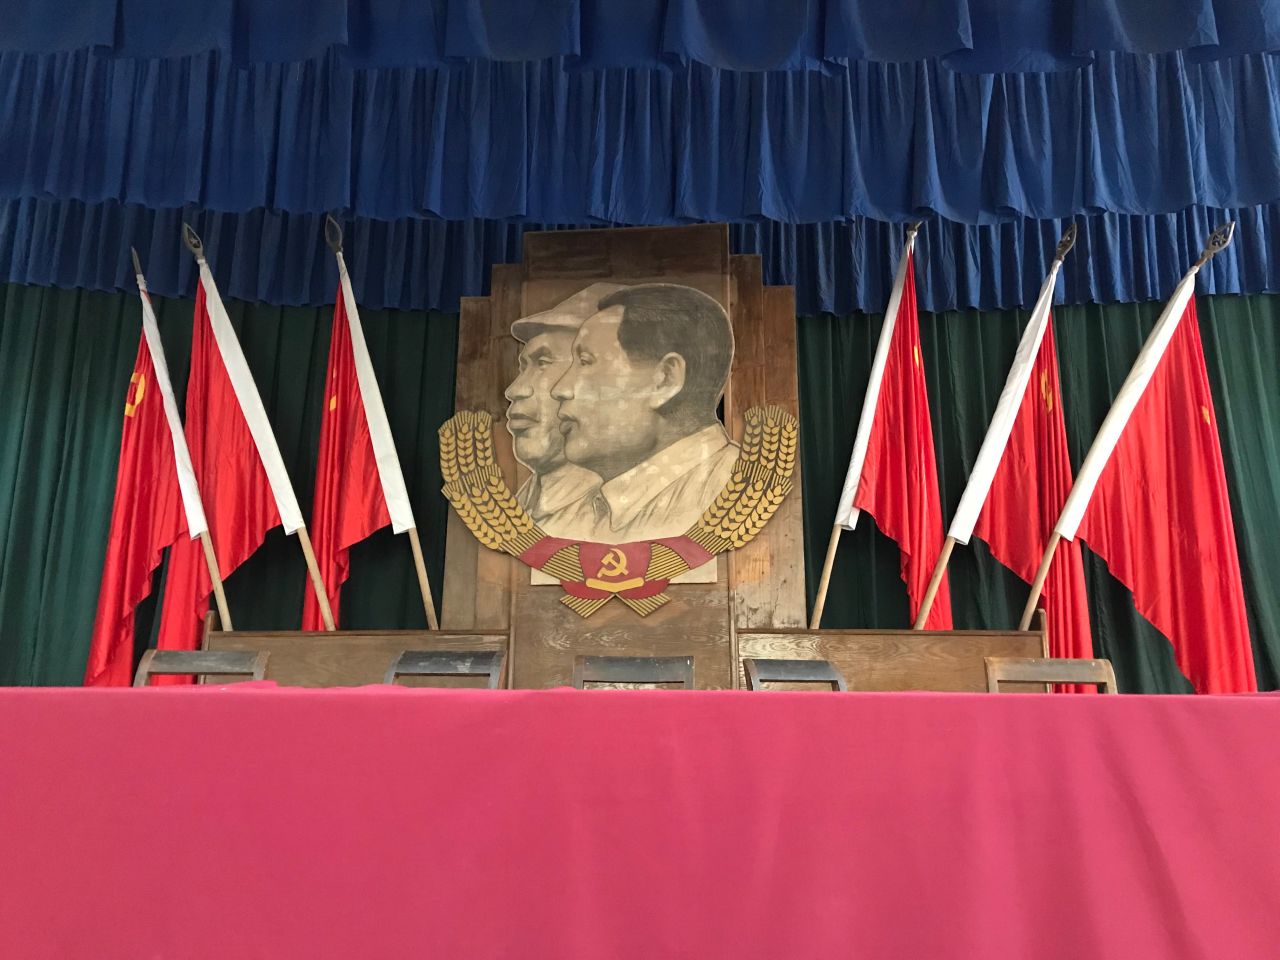 Mao's portrait is hung at the Yangjialing auditorium in Yan'an, where the Chinese Communist Party held its seventh national congress in 1945, during which Mao Zedong Thought was confirmed as the party's guiding principle.